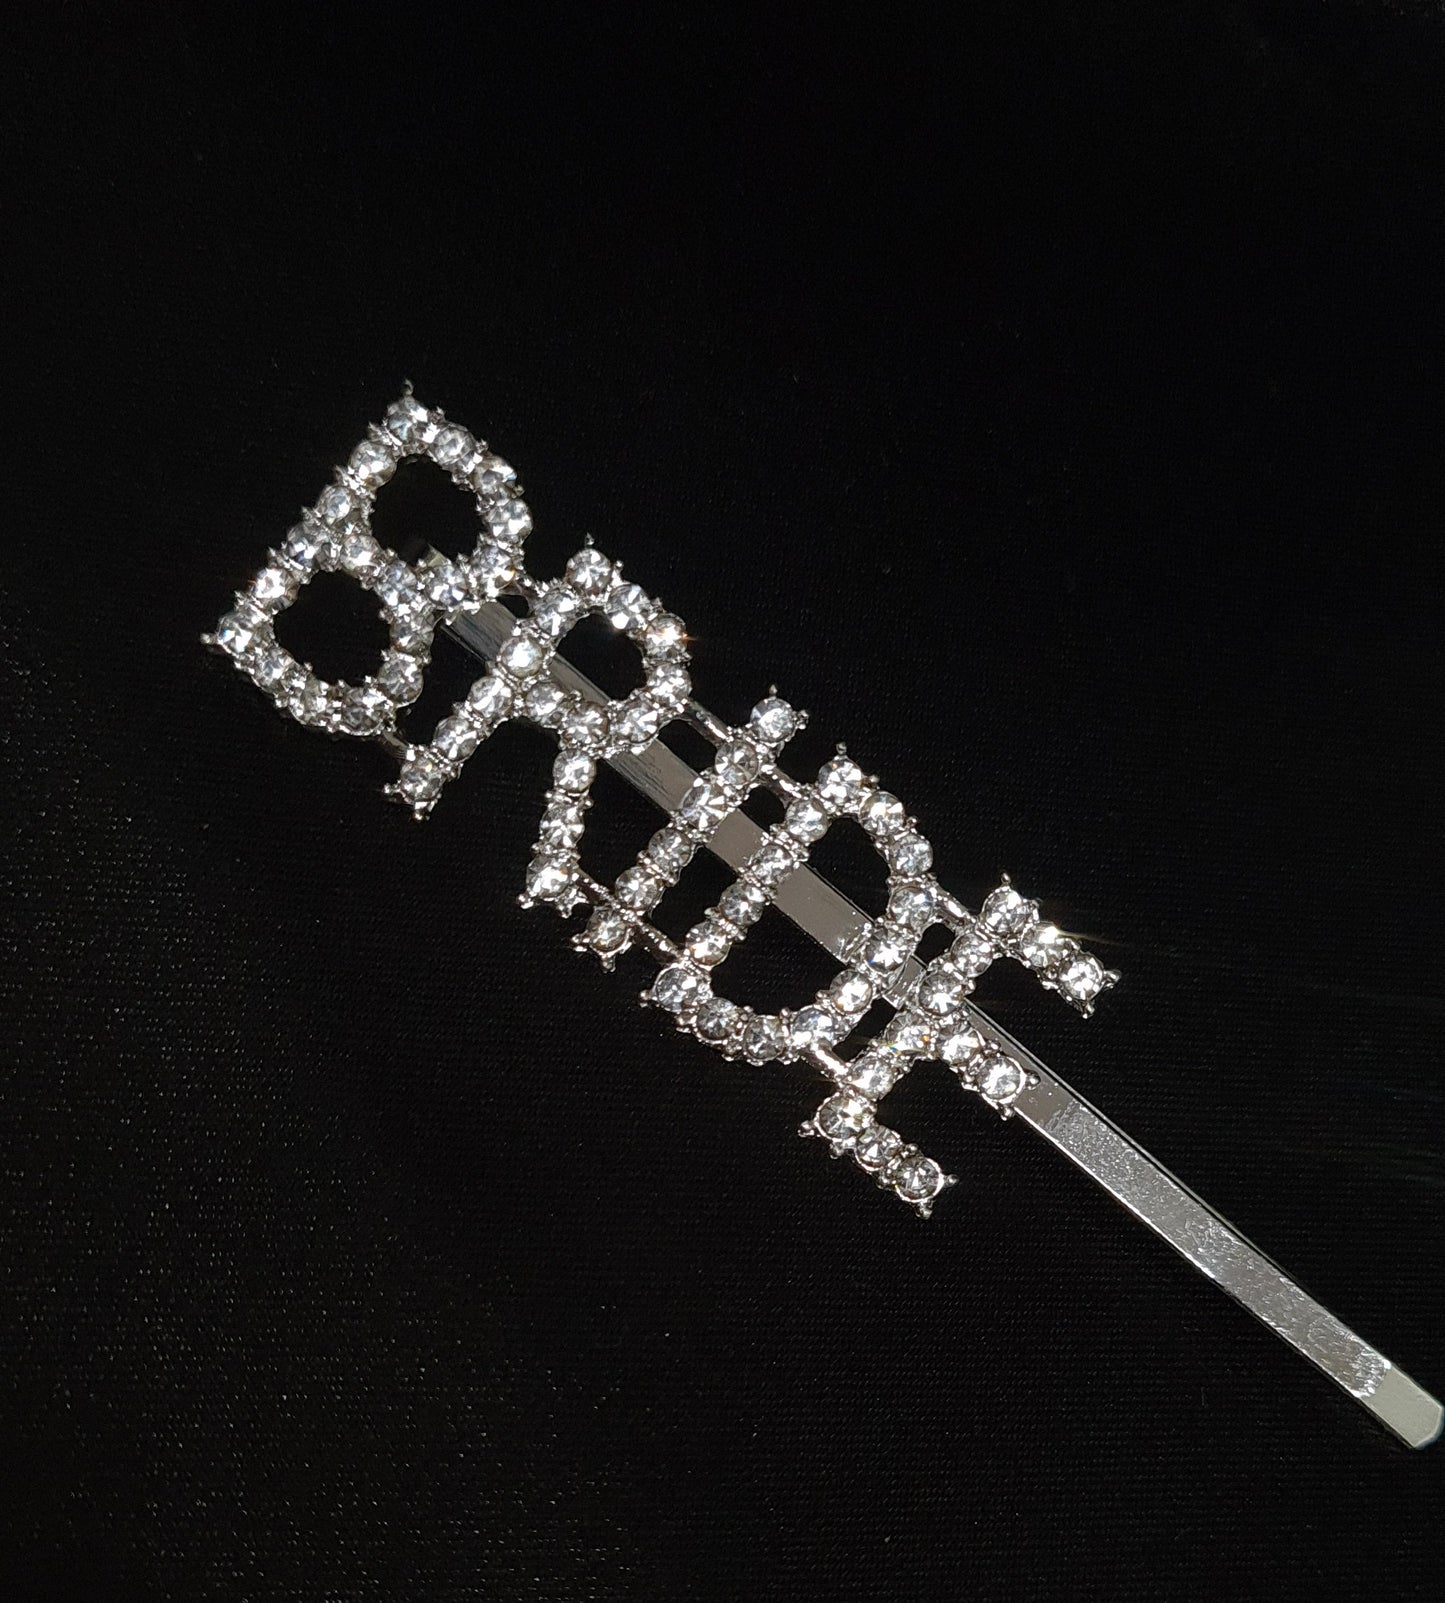 Bride Pin an elegant accessory crafted in silver with radiant crystal accents and cubic zirconia stones.